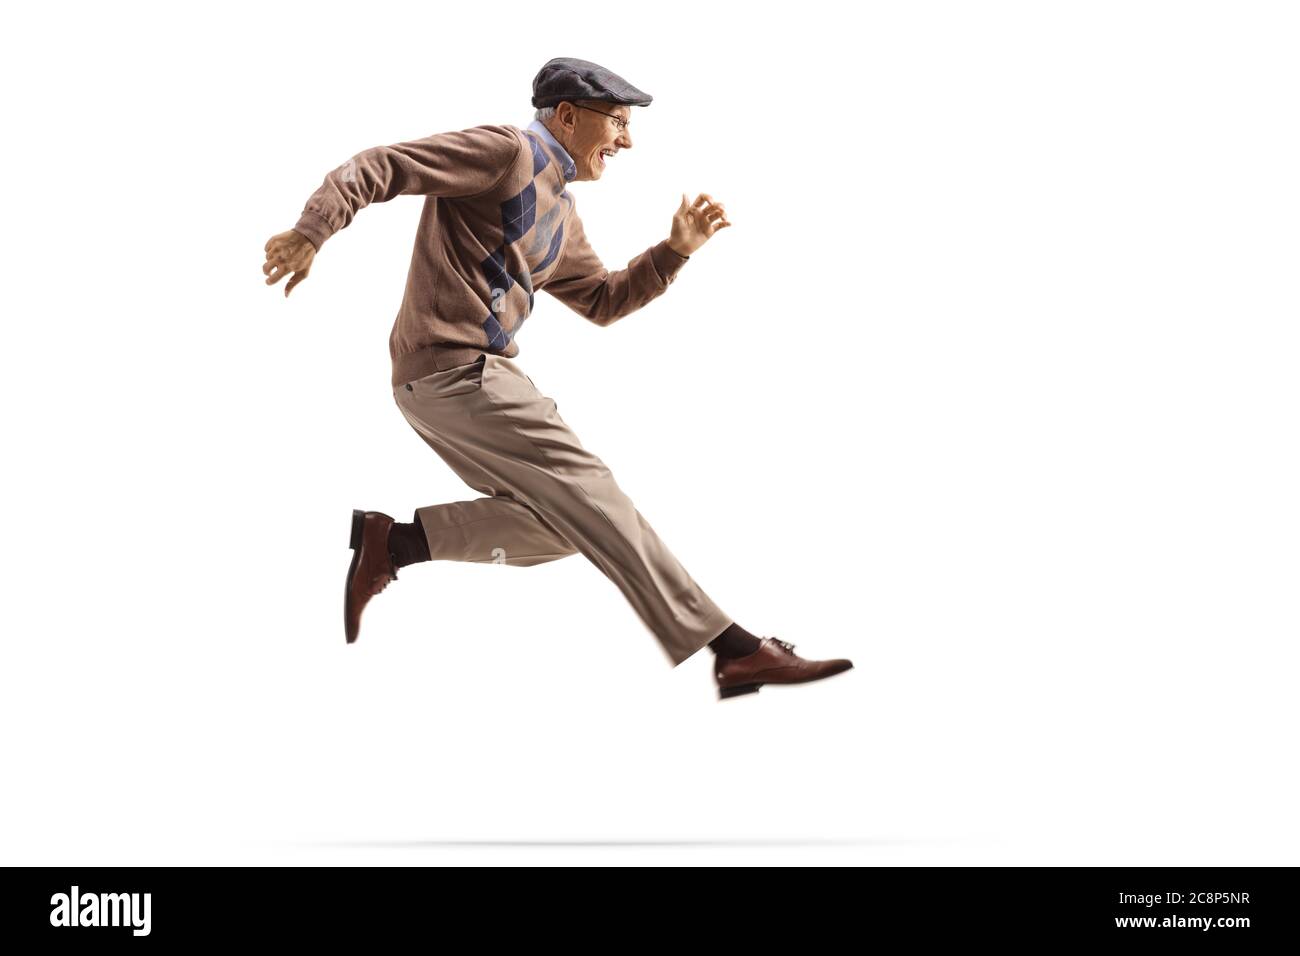 Excited elderly man jumping and kicking isolated on white background Stock Photo